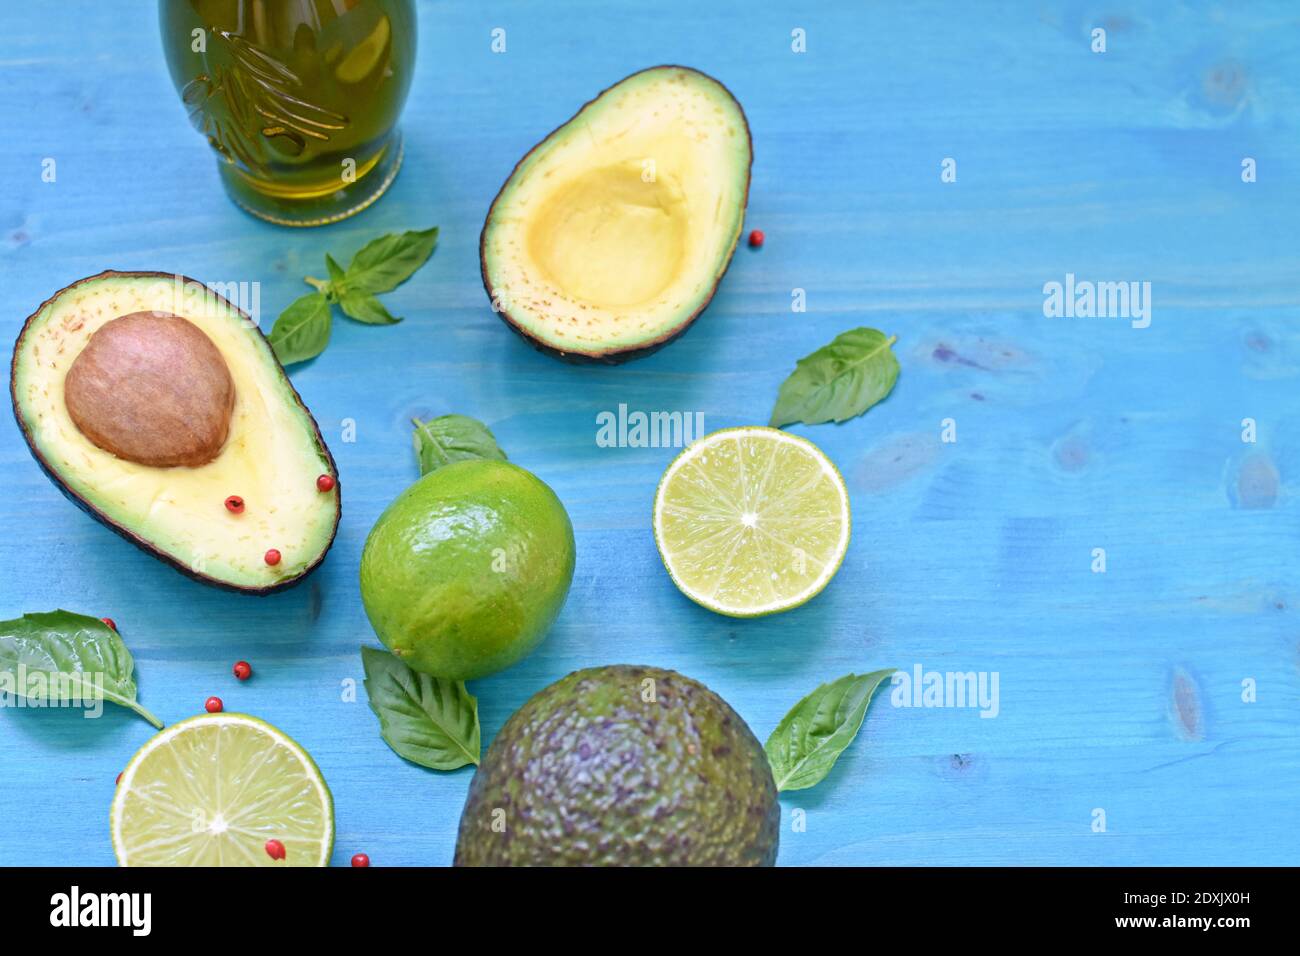 Top table concept with avocado, olive oil, limes and mint leaves on blue background. Copy text space Stock Photo